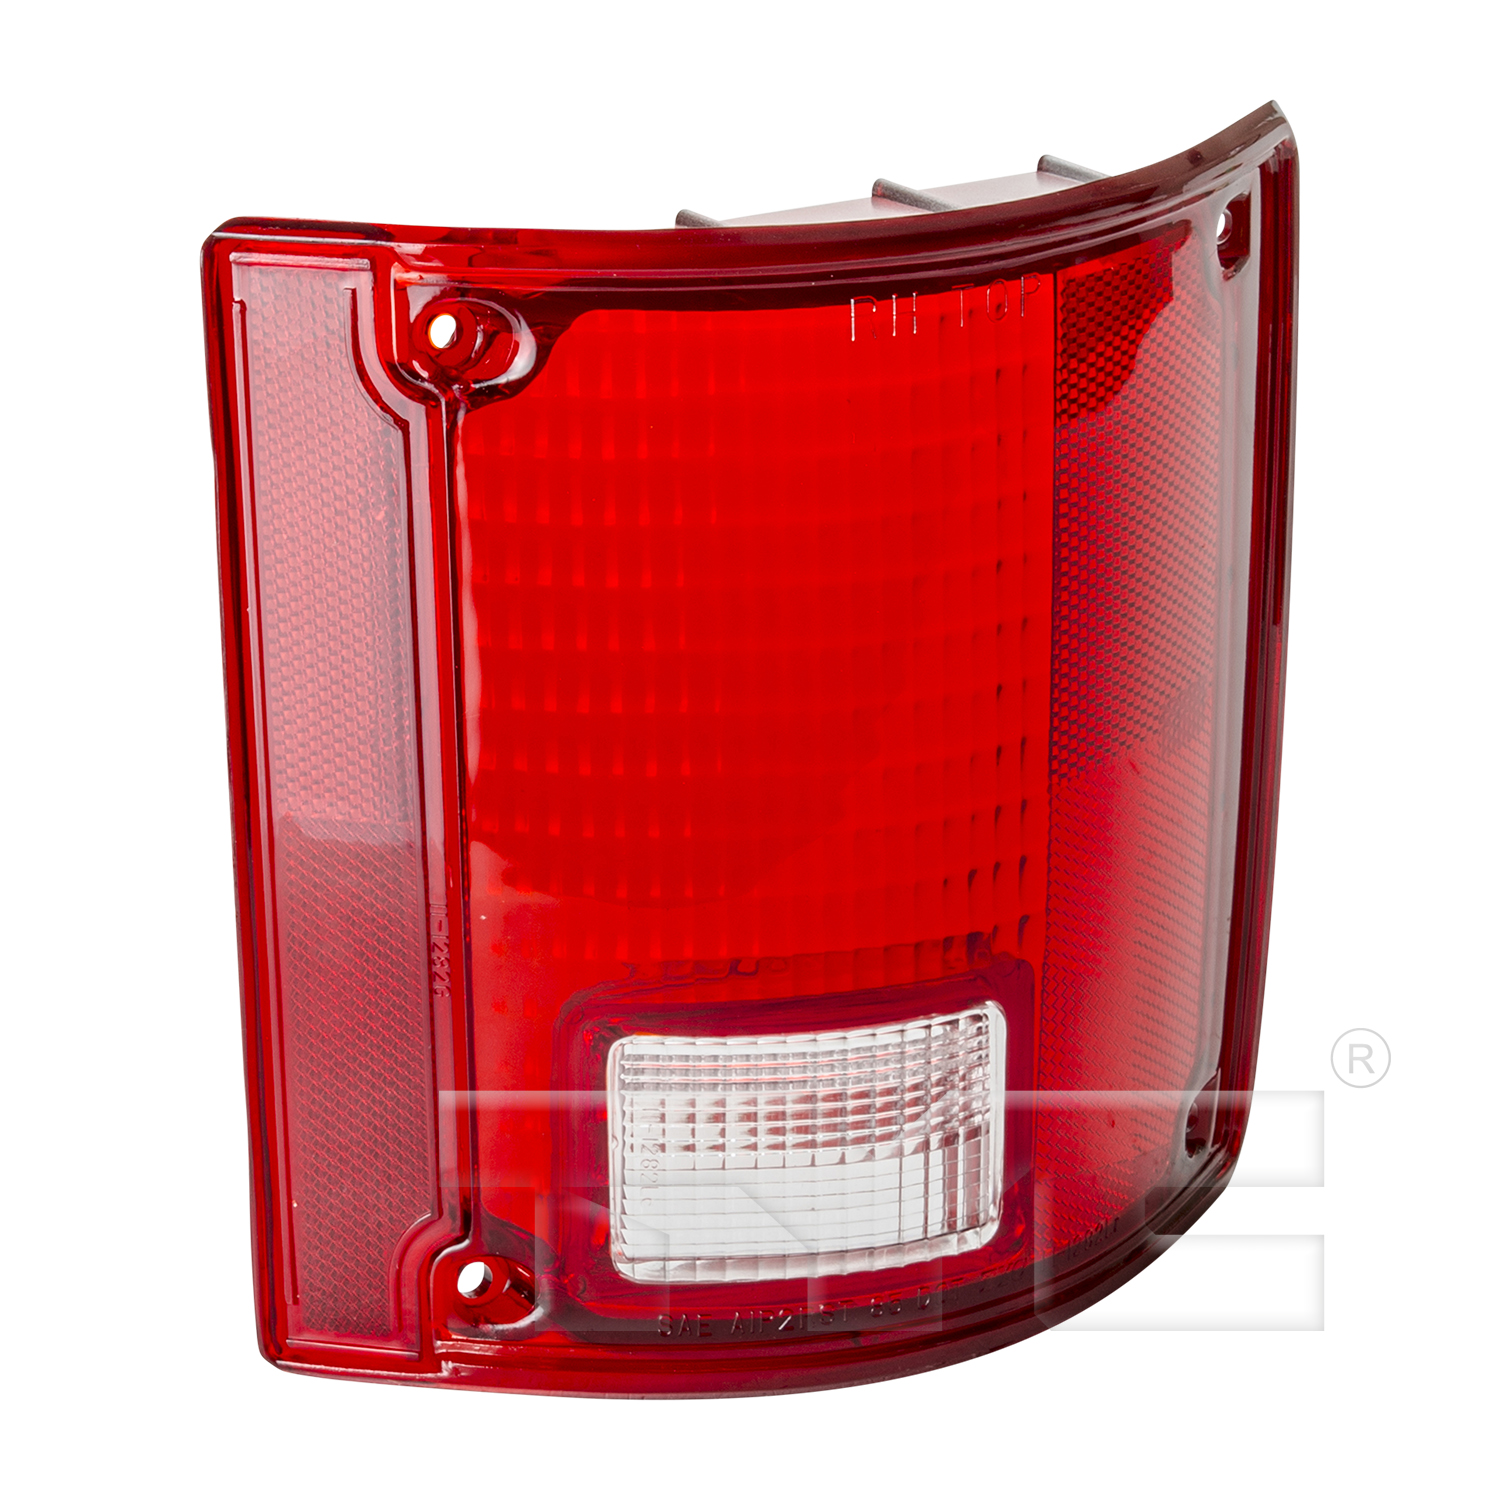 Aftermarket TAILLIGHTS for GMC - JIMMY, JIMMY,73-91,RT Taillamp lens